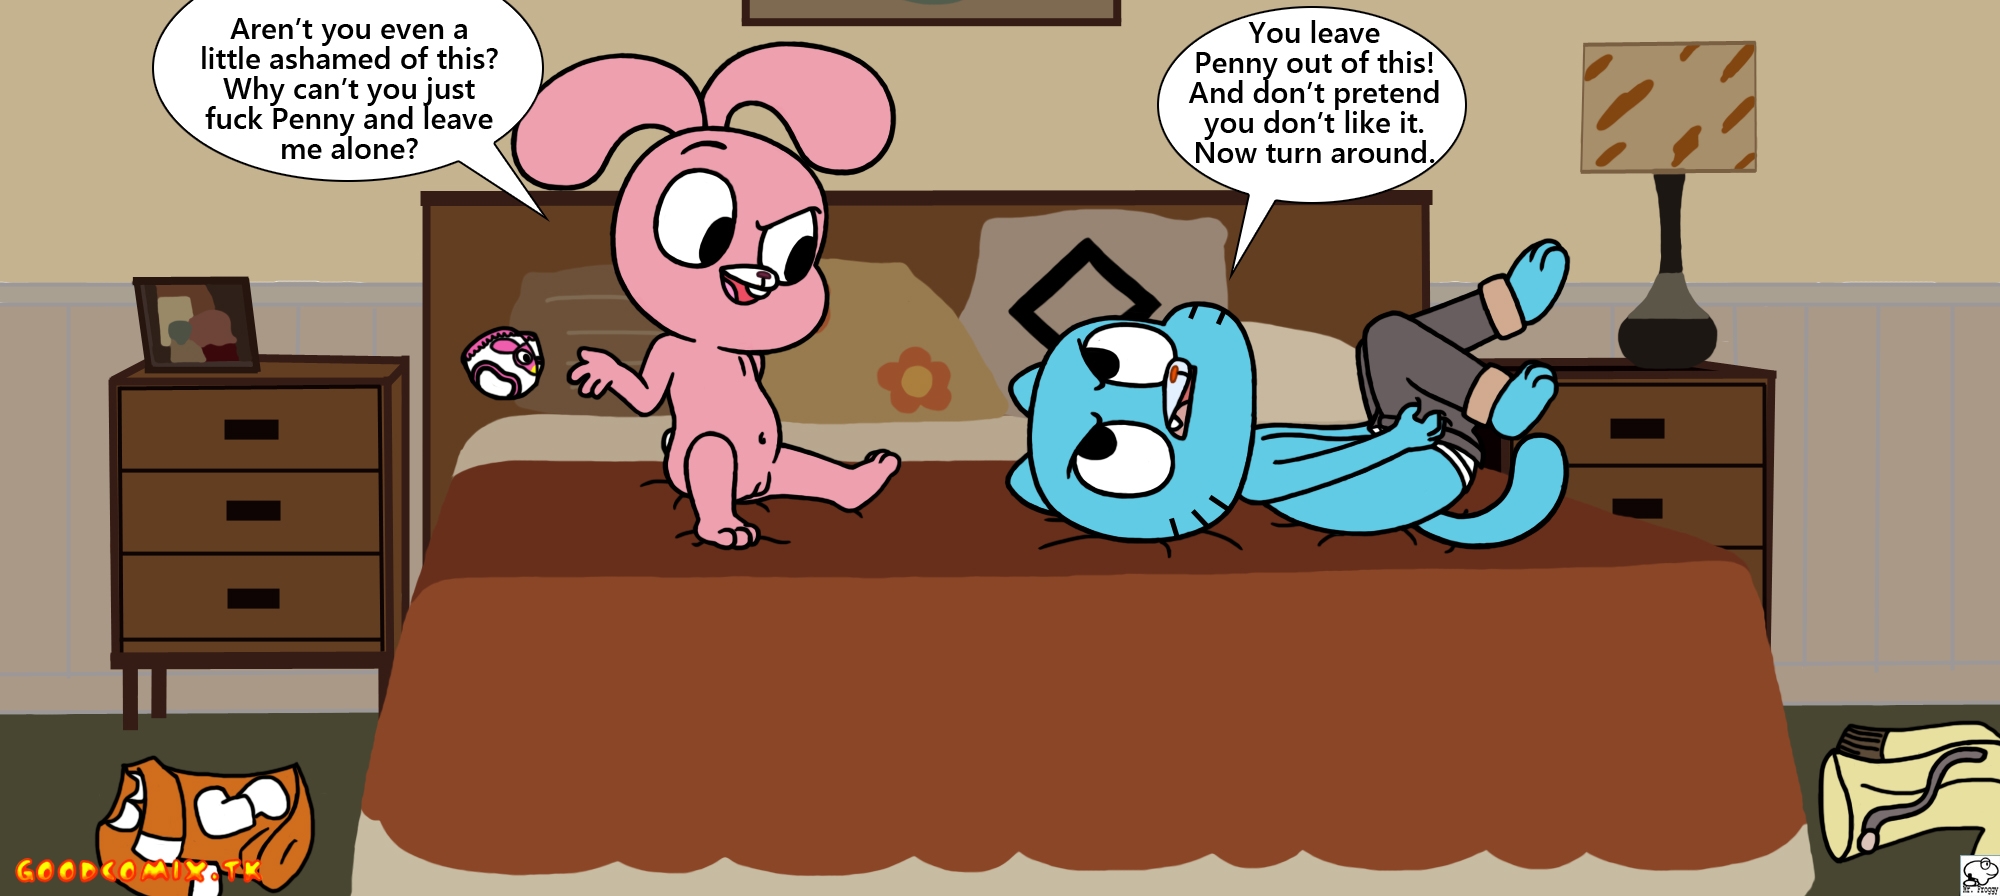 Amazing World Of Gumball Porn Gumball Naked - Matchless amazing world of gumball family join. All - Nude pic